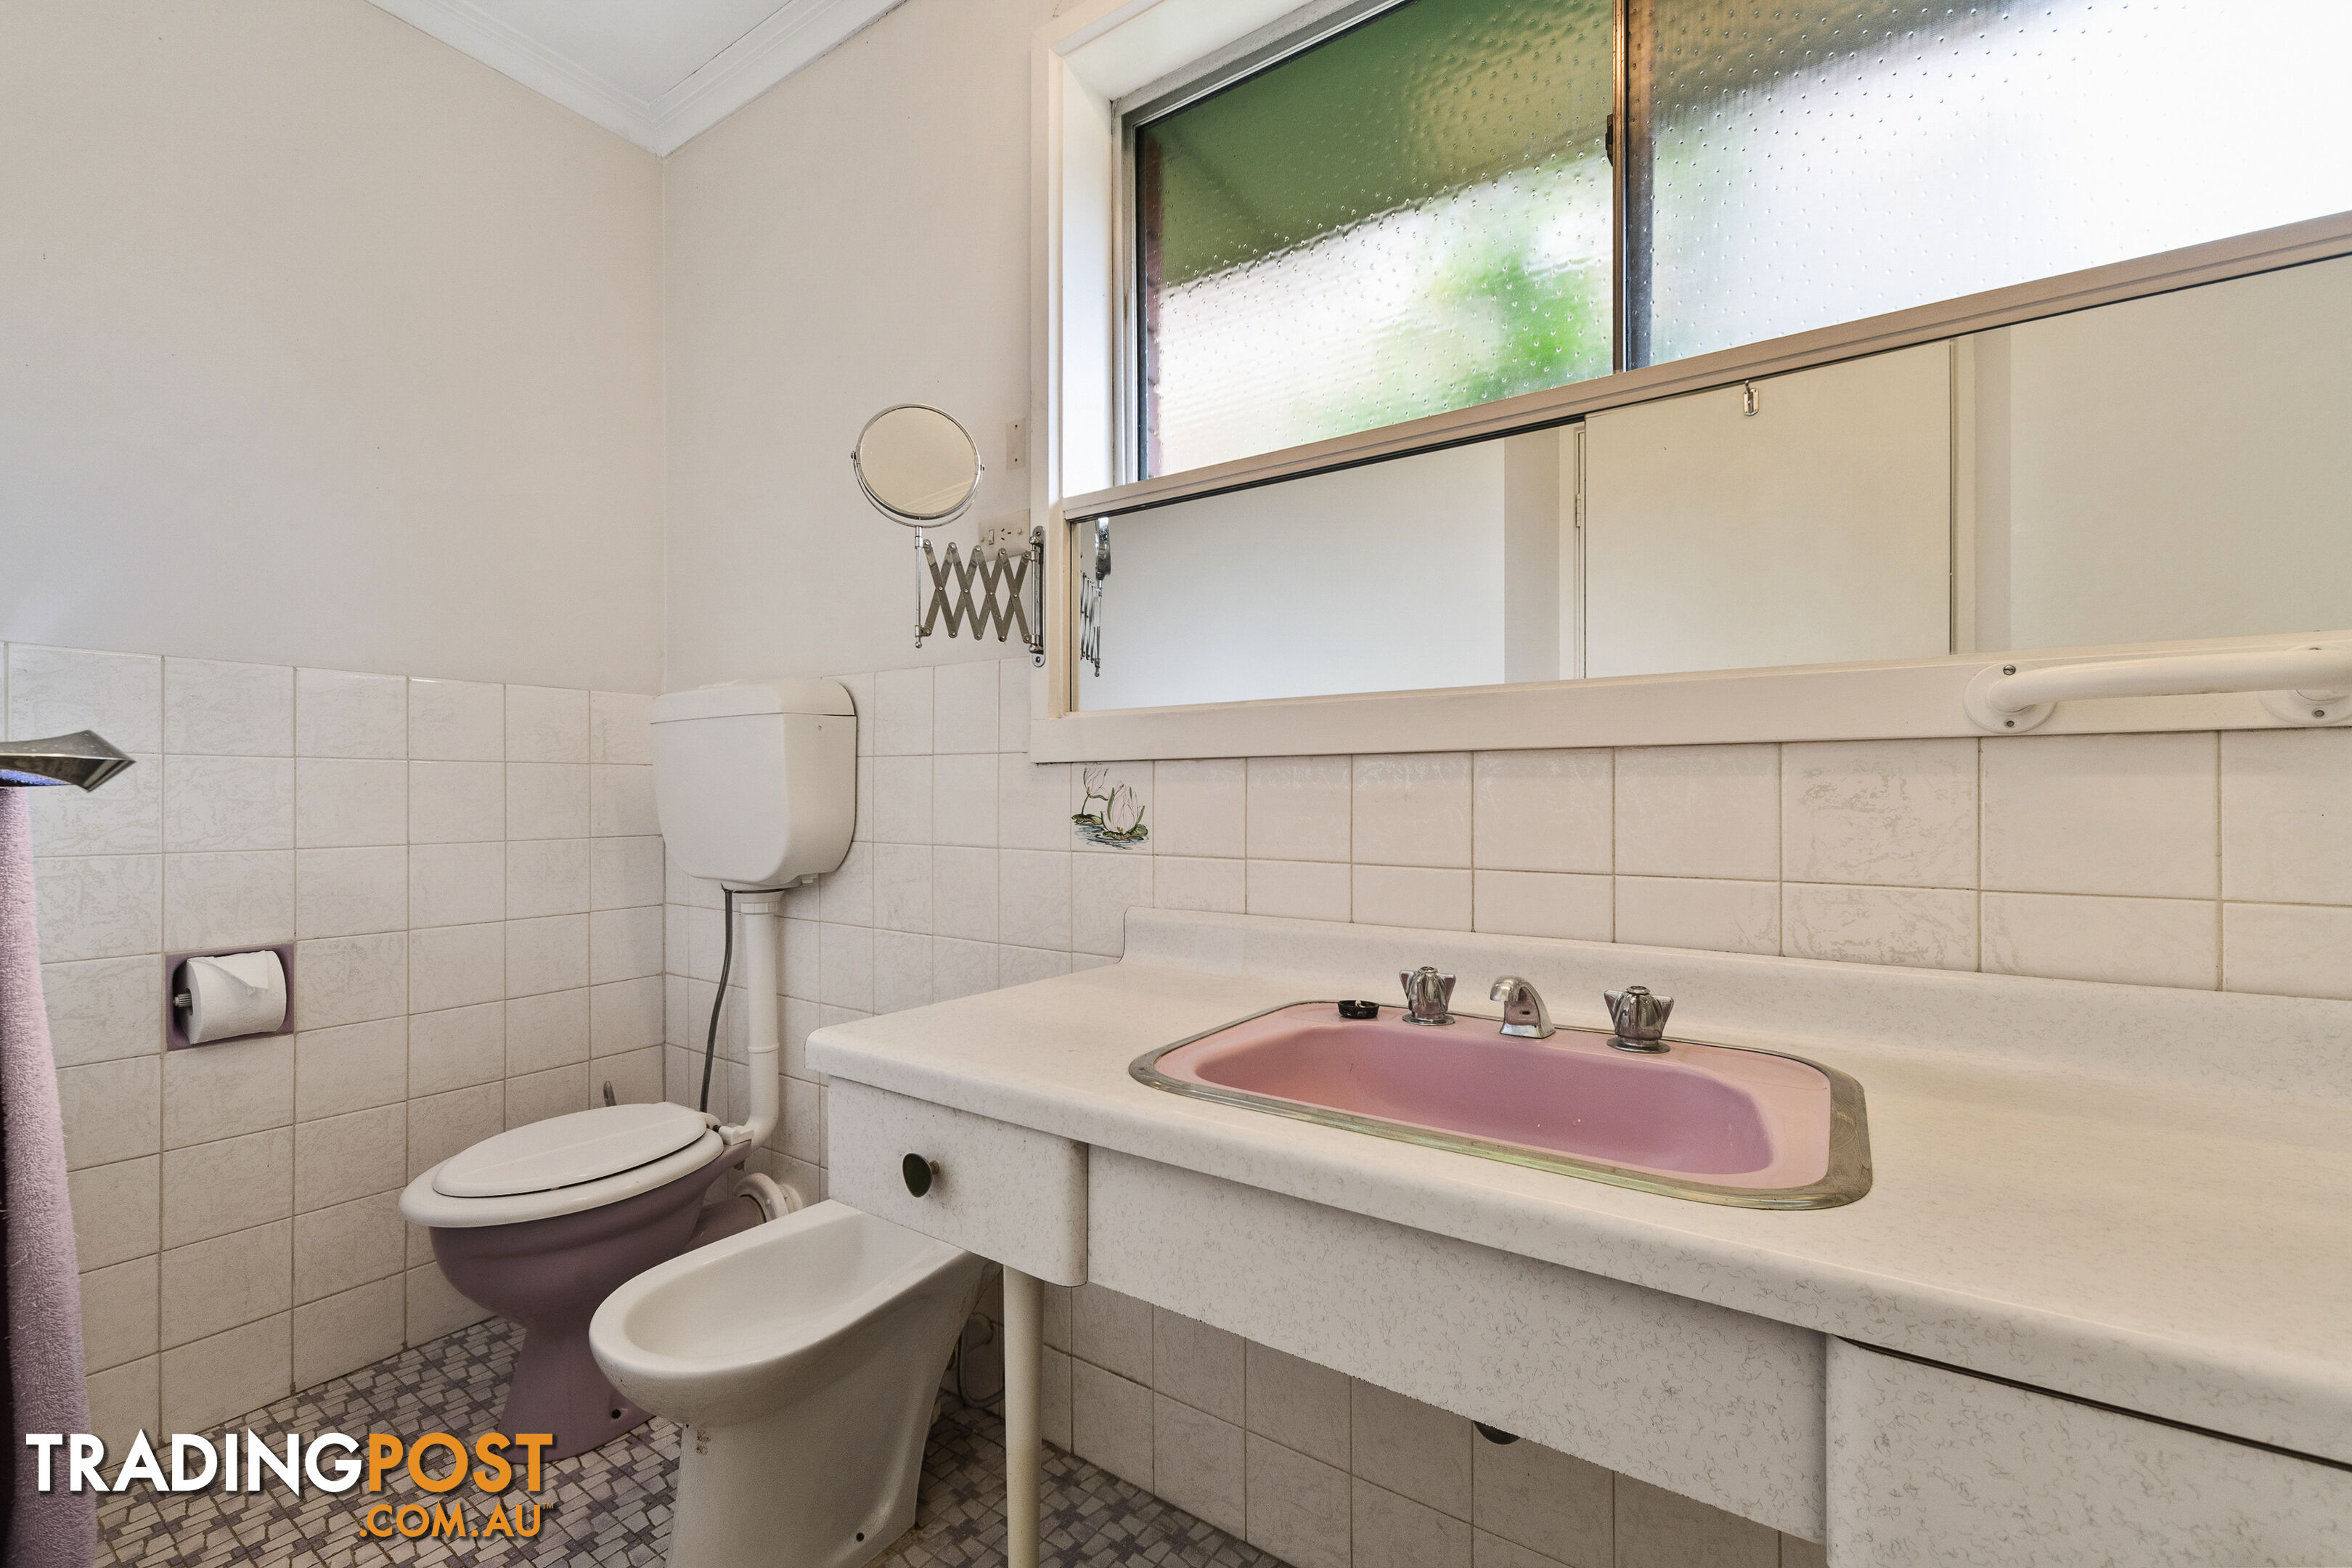 1 Maree St Bentleigh East VIC 3165